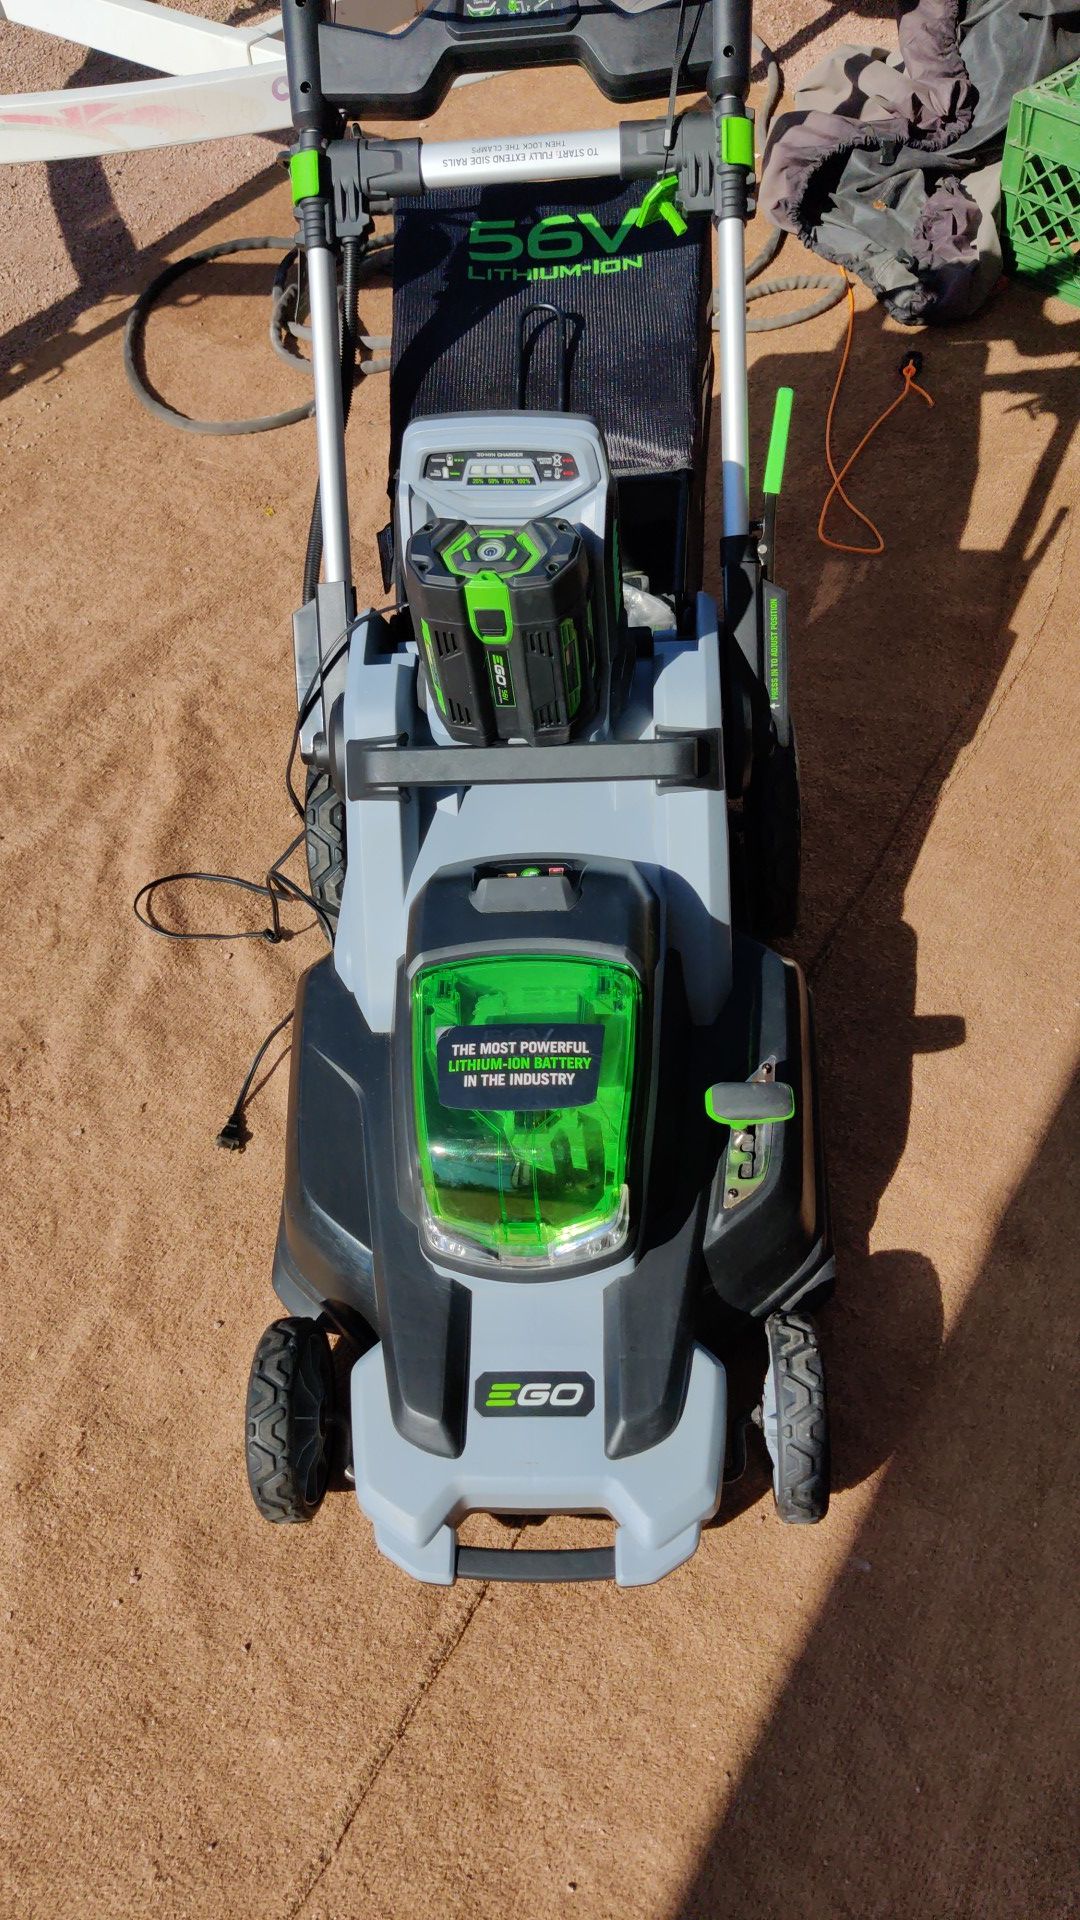 New ego 56 volt lawn mower and battery will trade possibly??? What do you have